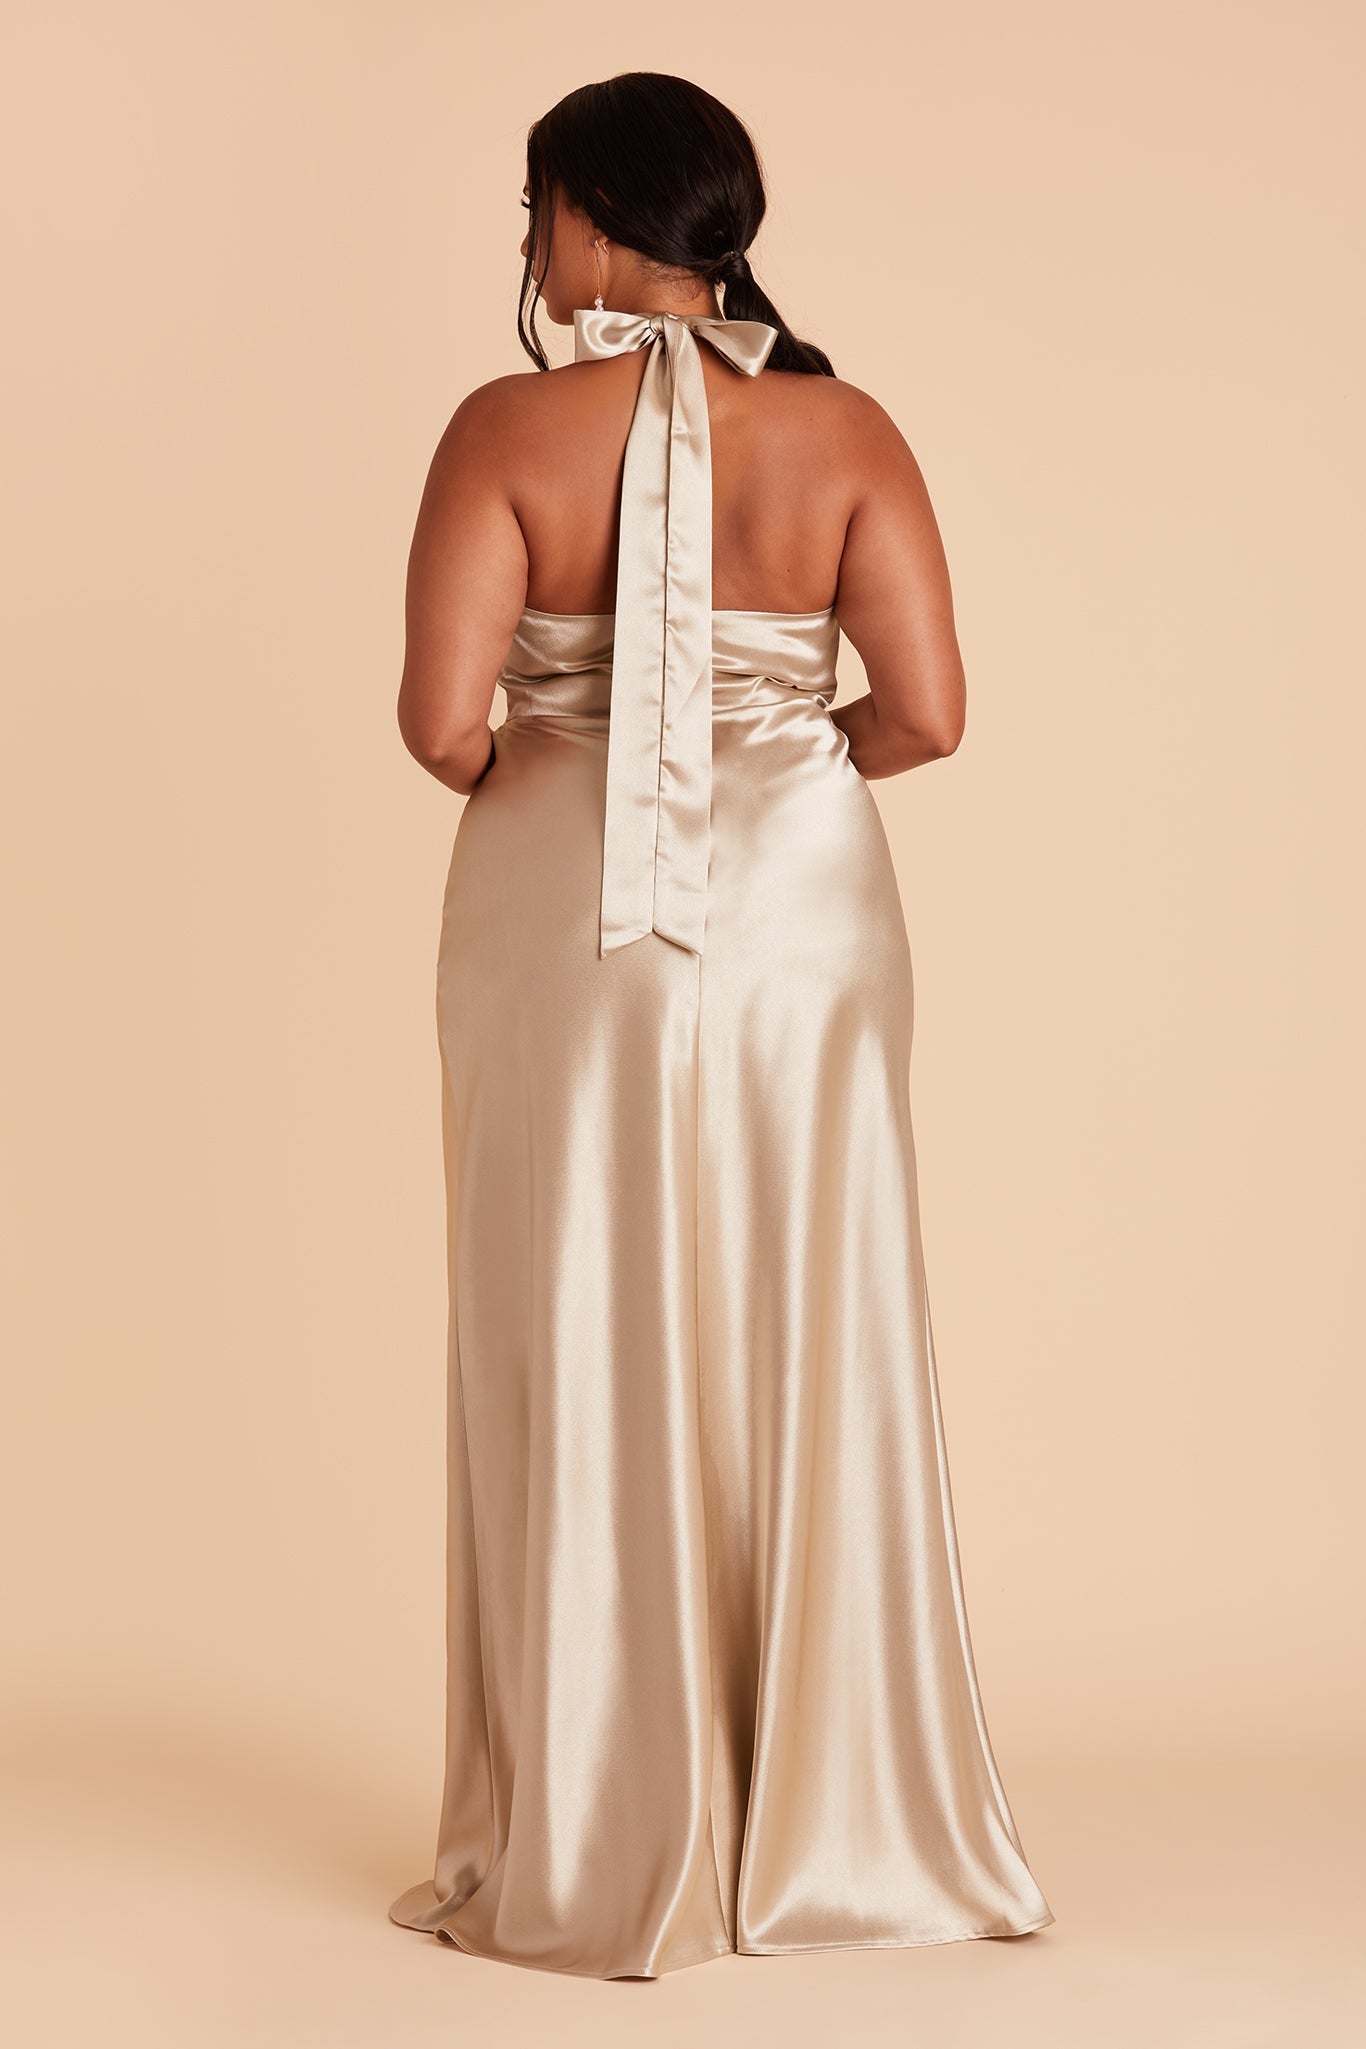 Back view of the Monica Dress Curve in neutral champagne satin shows a model with a halter back tied in a bow at the back of their neck with the long tie ends draping along the back to the backside. The dress conforms to their body along the back and hips flaring slightly to the feet.